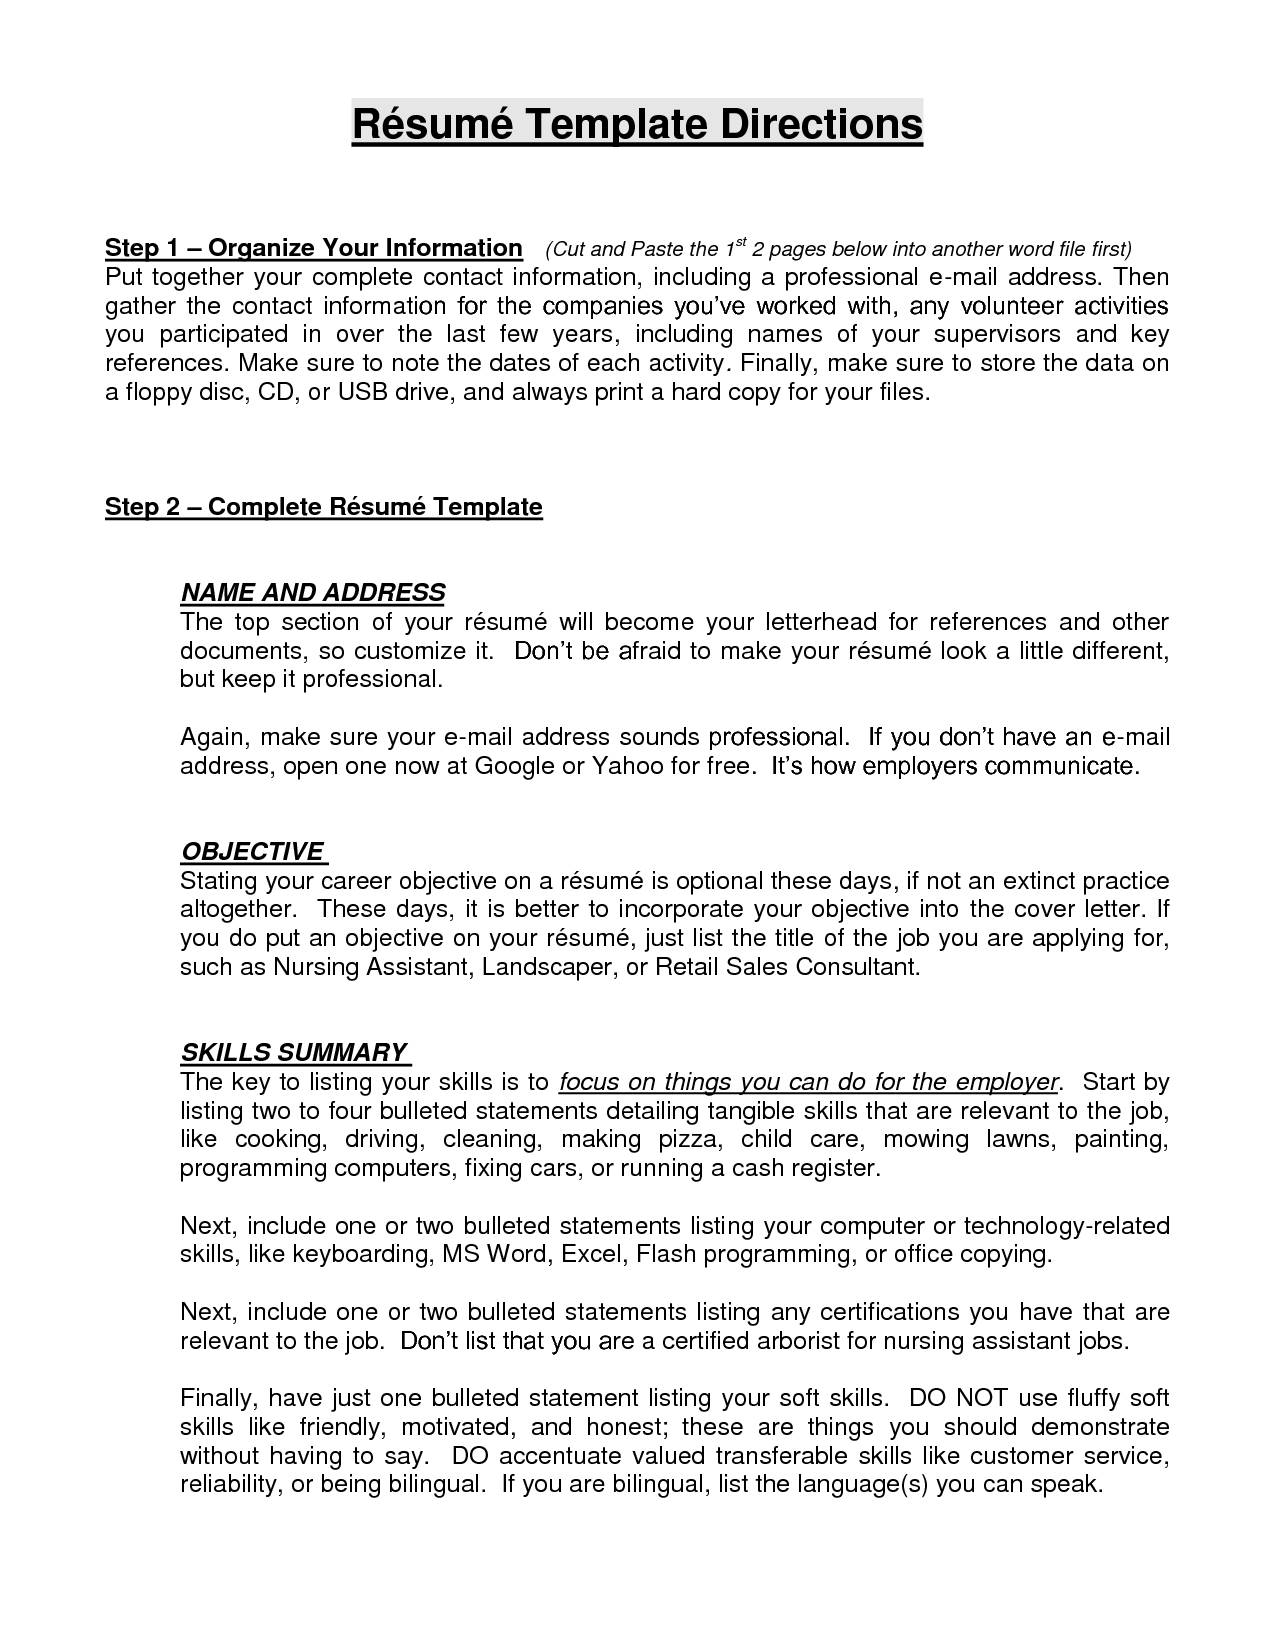 Skills Statement For Resumes Caflei within dimensions 1275 X 1650